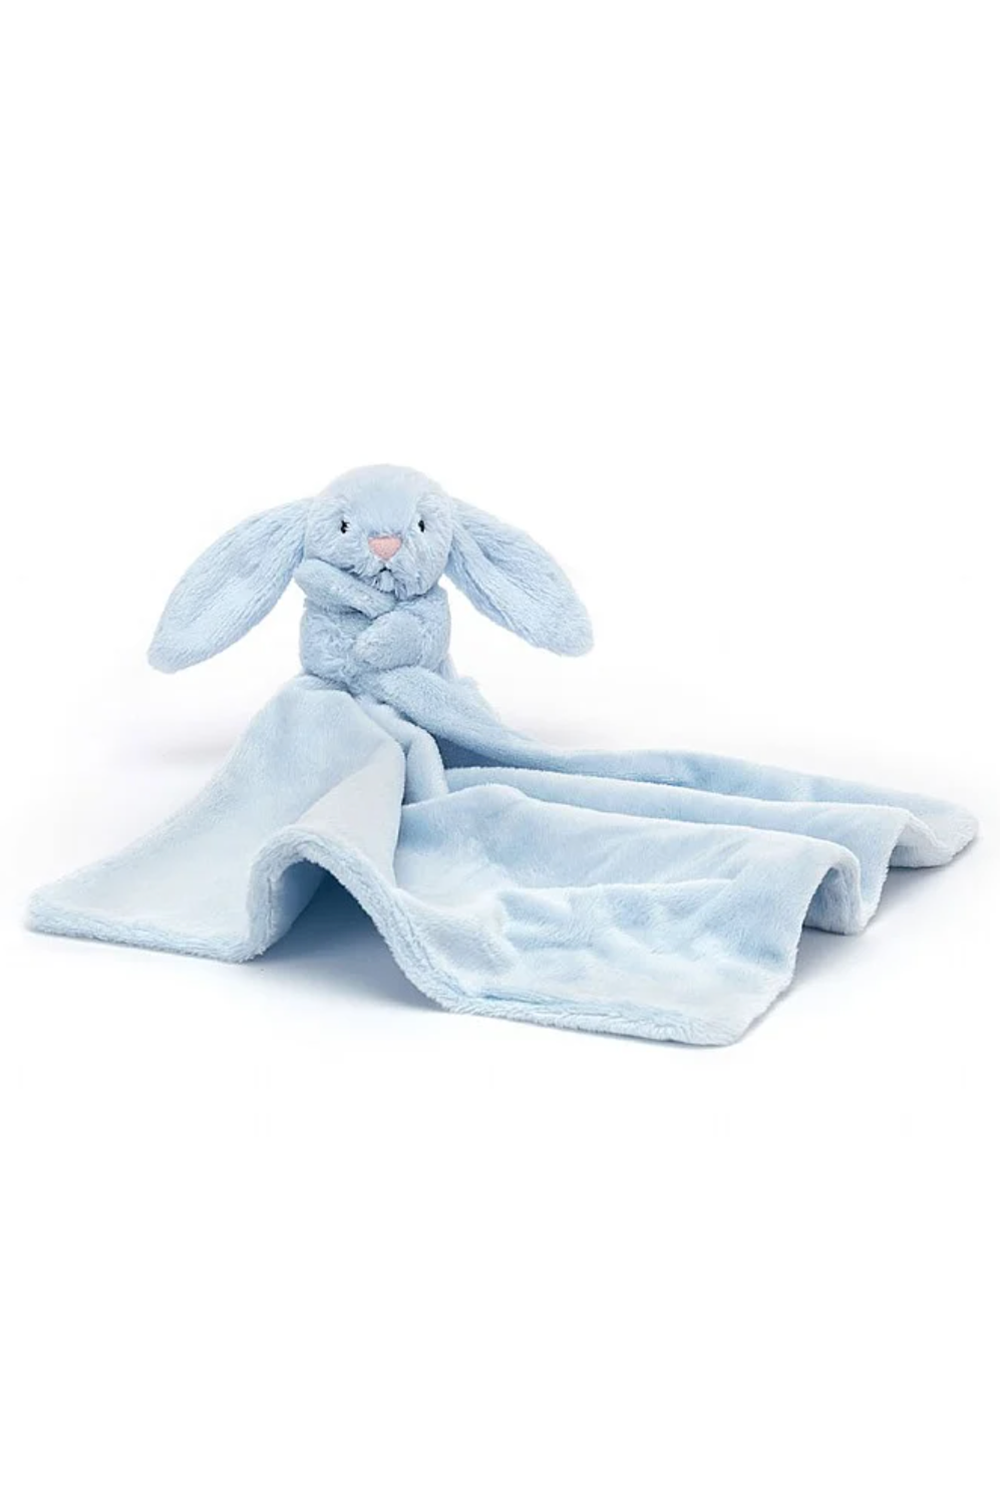 JELLYCAT Bashful Soother - Blue Bunny